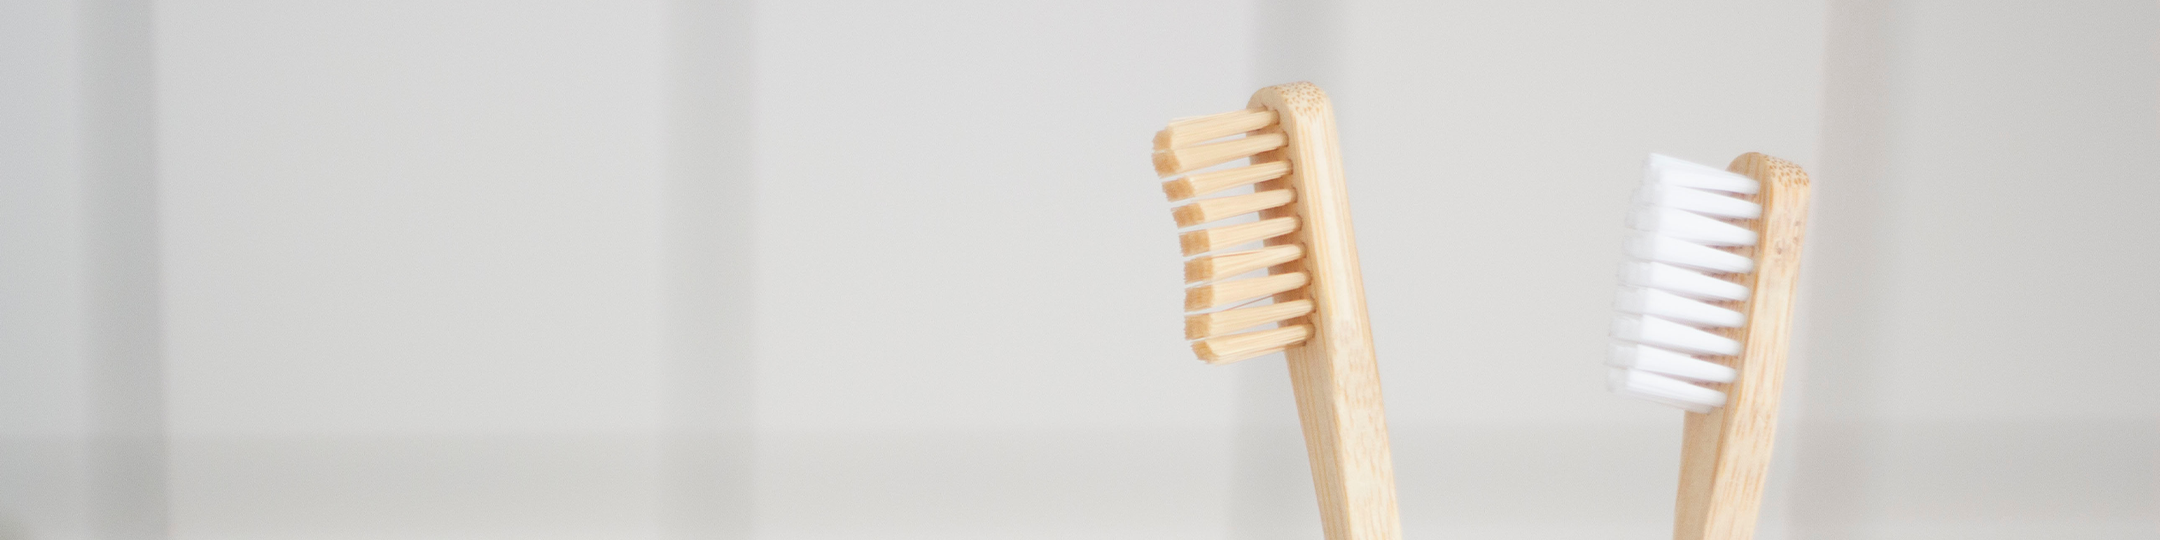 natural bristle wooden toothbrushes against a white tile background